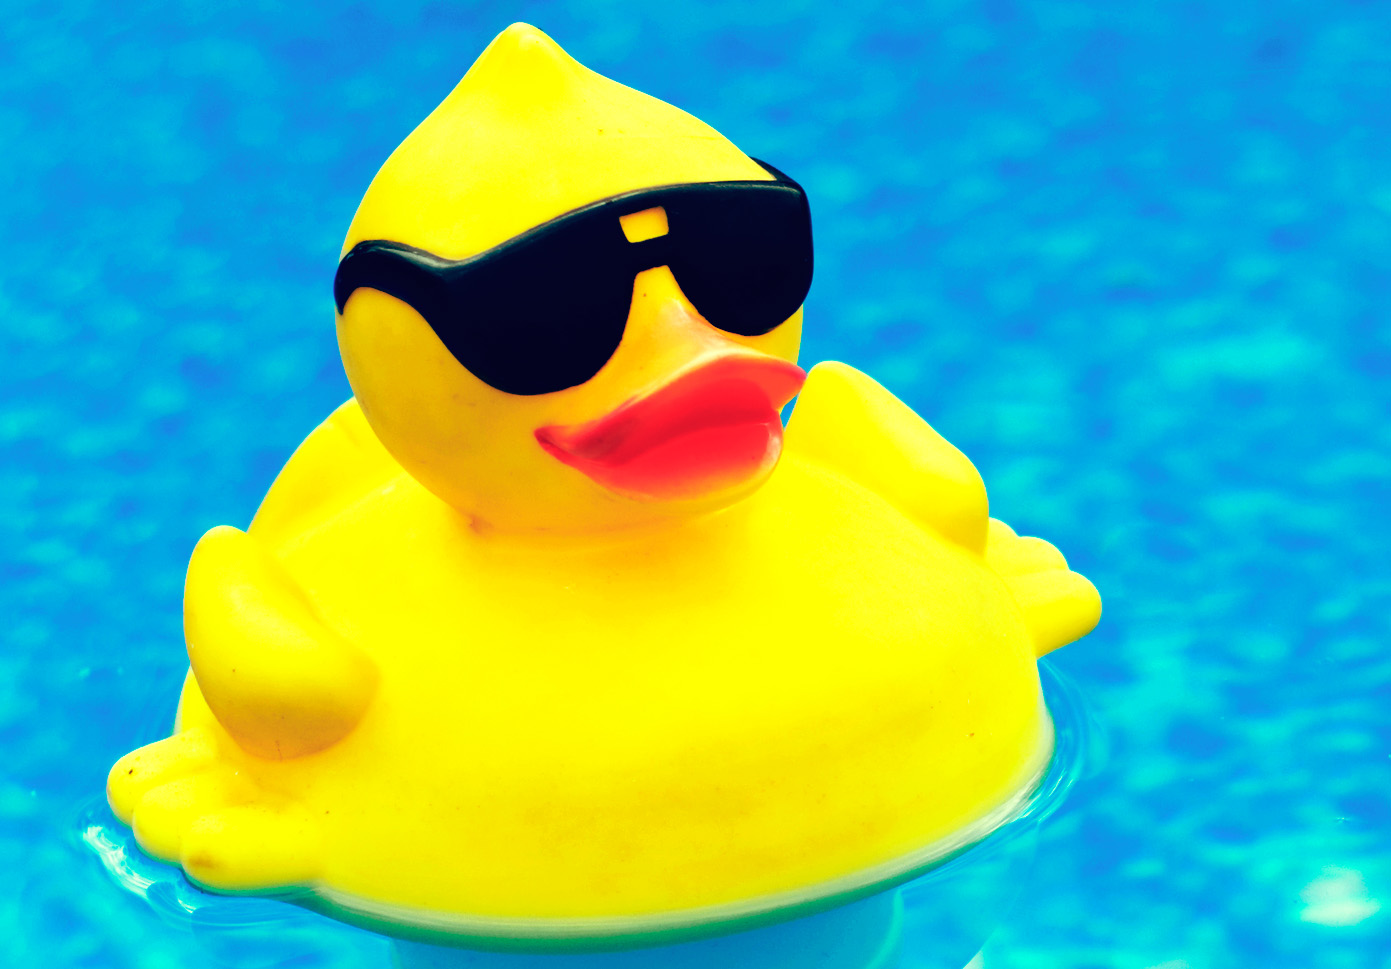 Big Inflatable Yellow Duck With Sunglasses - Channal Inflatables